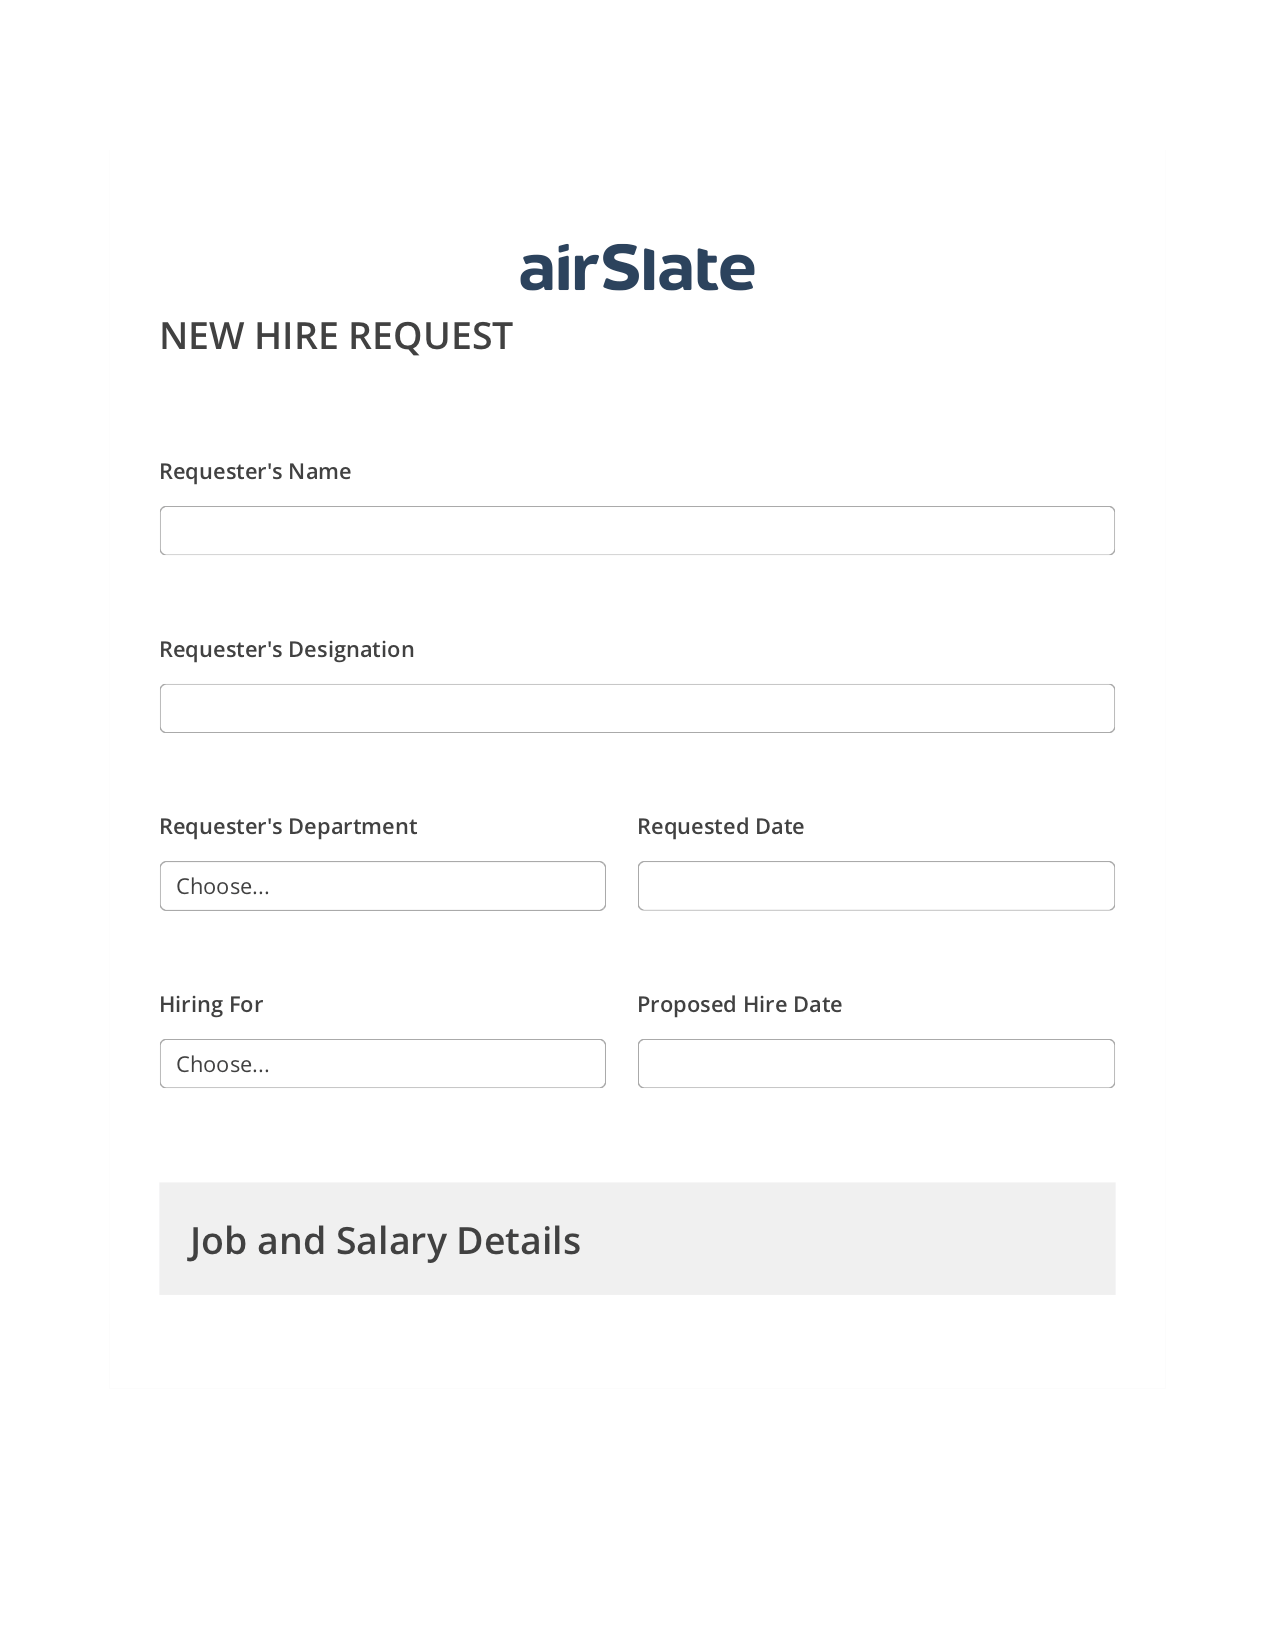 Hiring Request Workflow Pre-fill from Salesforce Records Bot, System Bot - Create a Slate in another Flow, Archive to Google Drive Bot